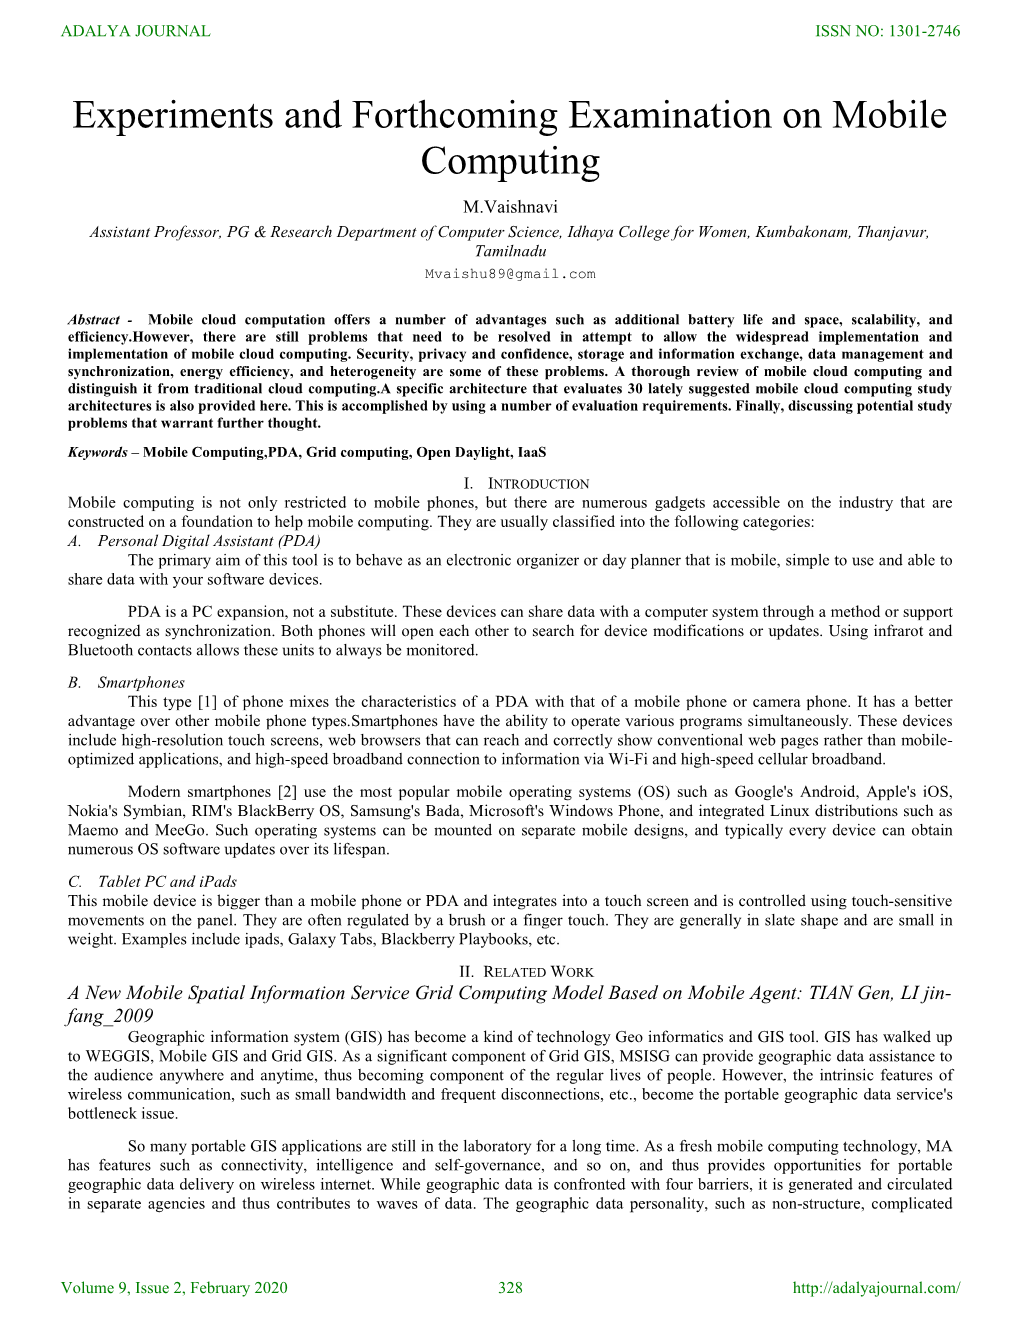 Experiments and Forthcoming Examination on Mobile Computing